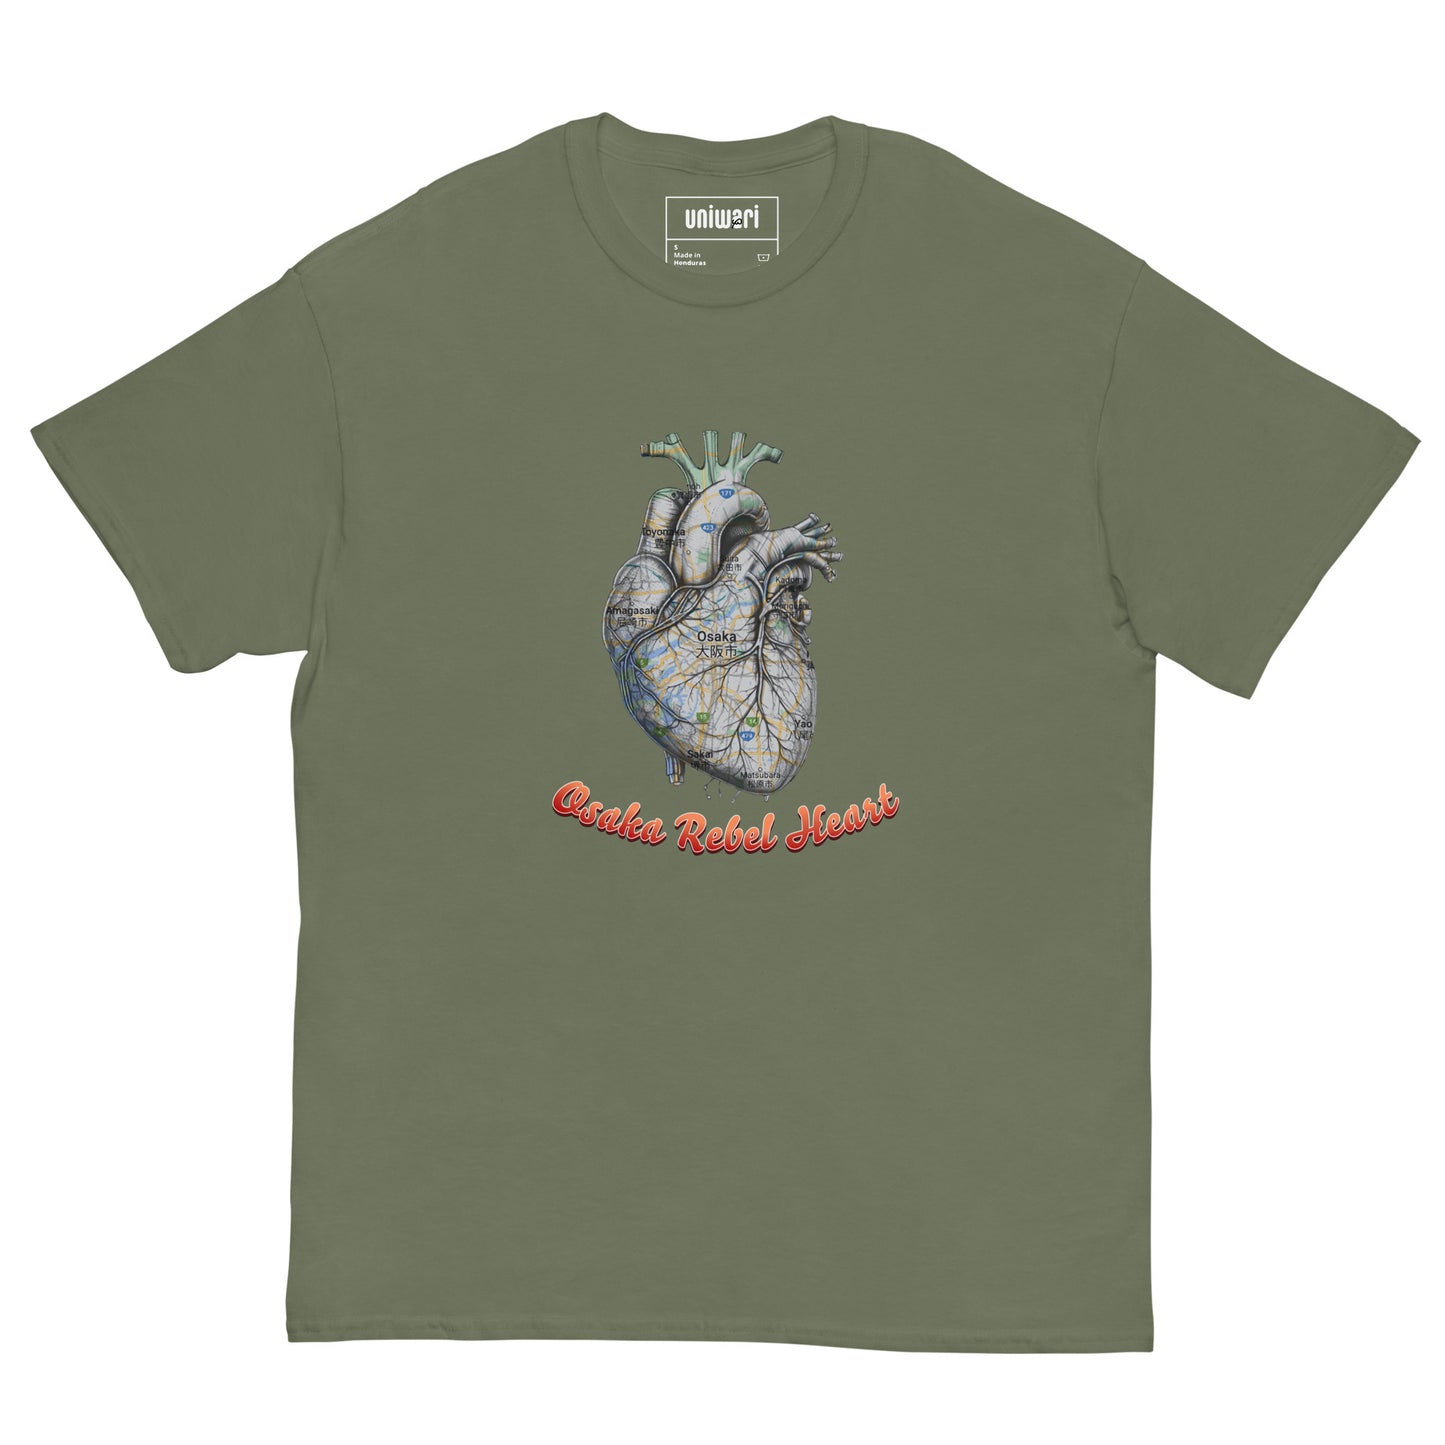 Green High Quality Tee - Front Design with a Heart Shaped Map of Osaka and a Phrase "Osaka Rebel Heart" print